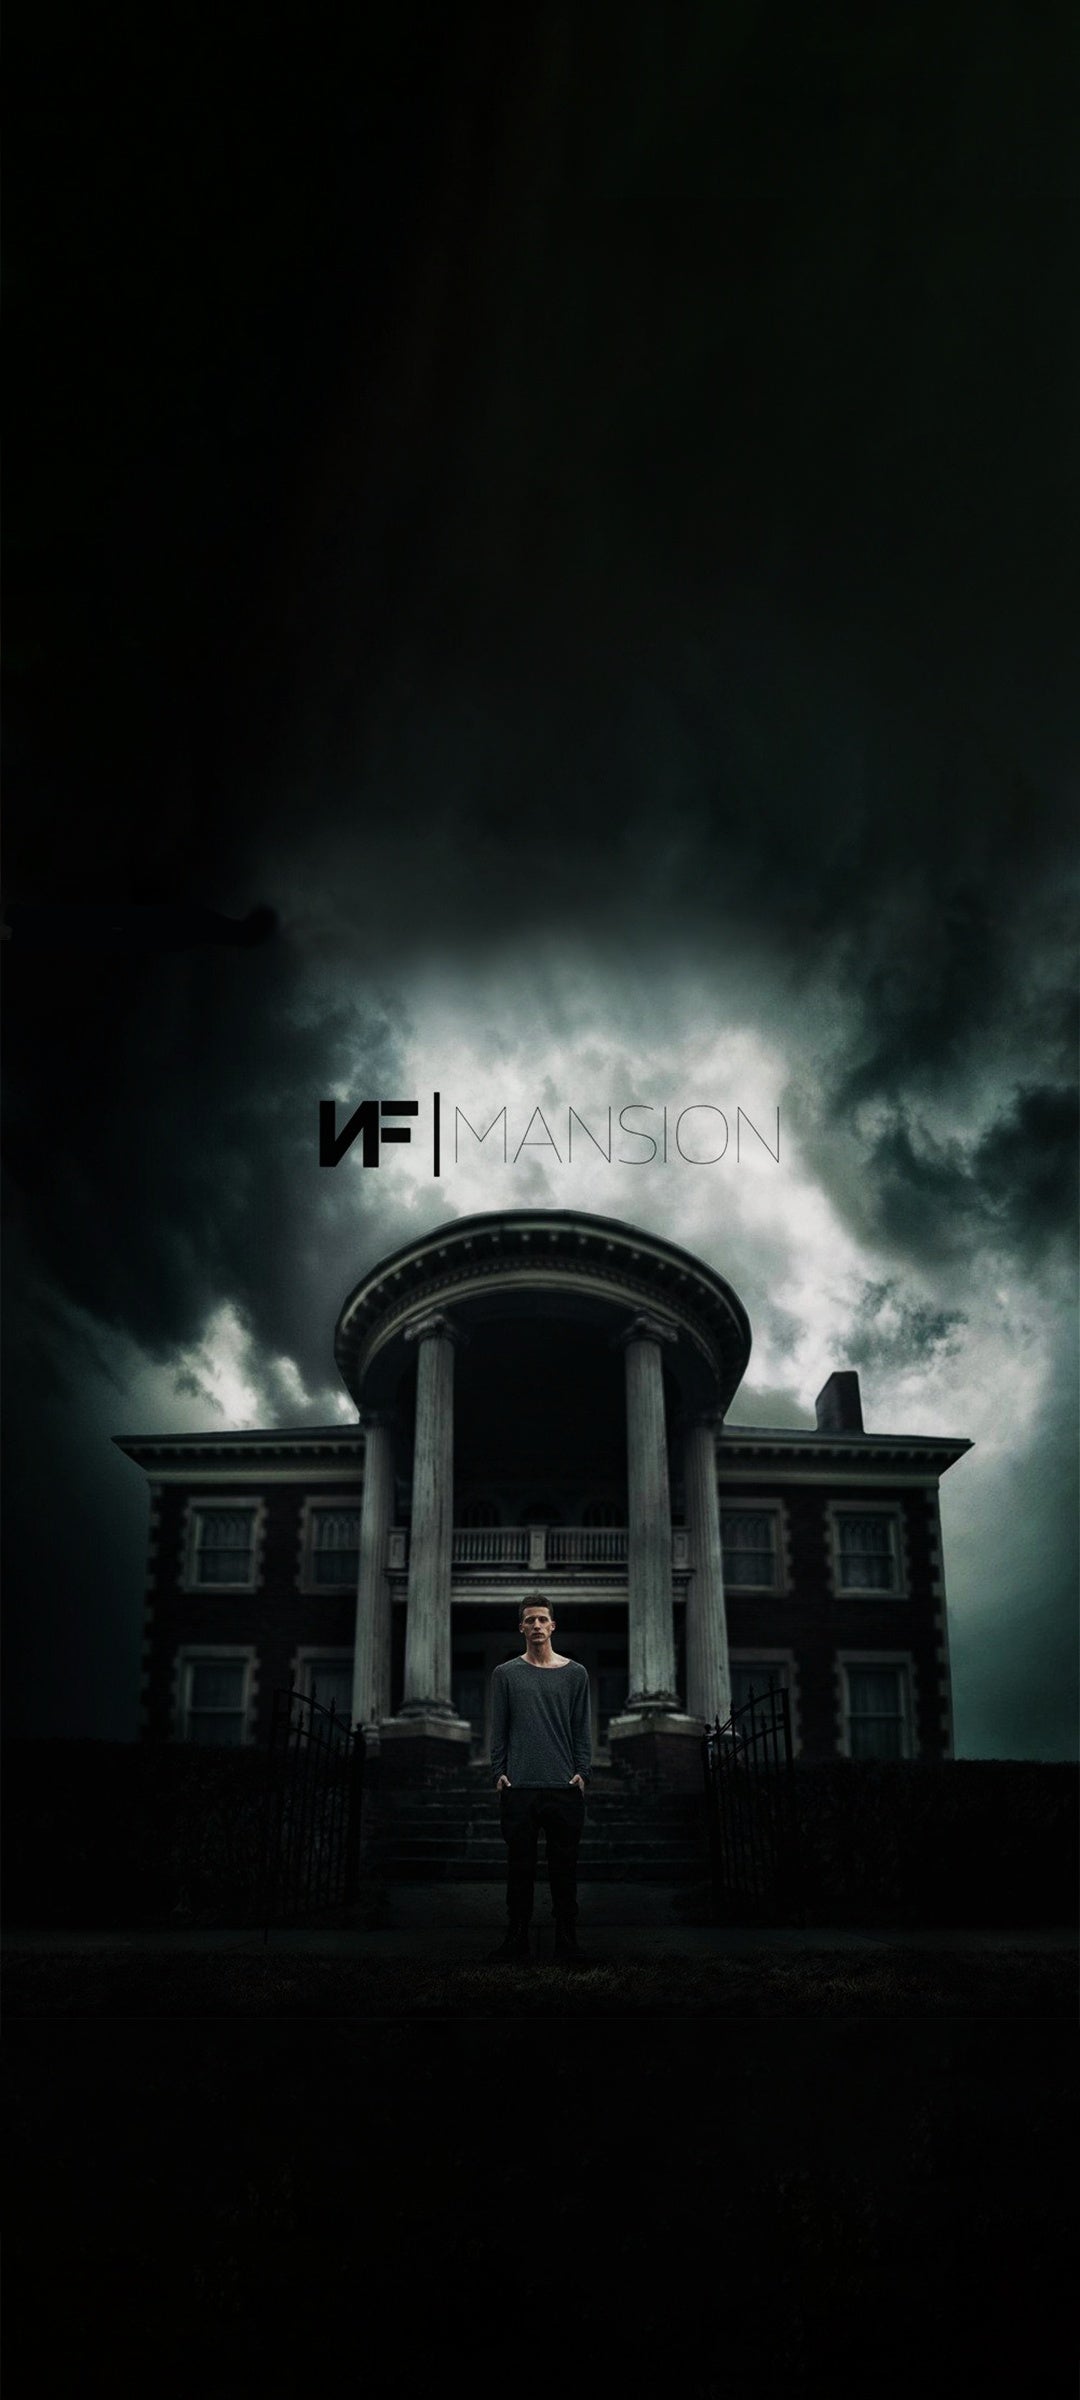 Mansion album cover x wallpaper ive also made some logic album wallpapers if youre interested rnfrealmusic